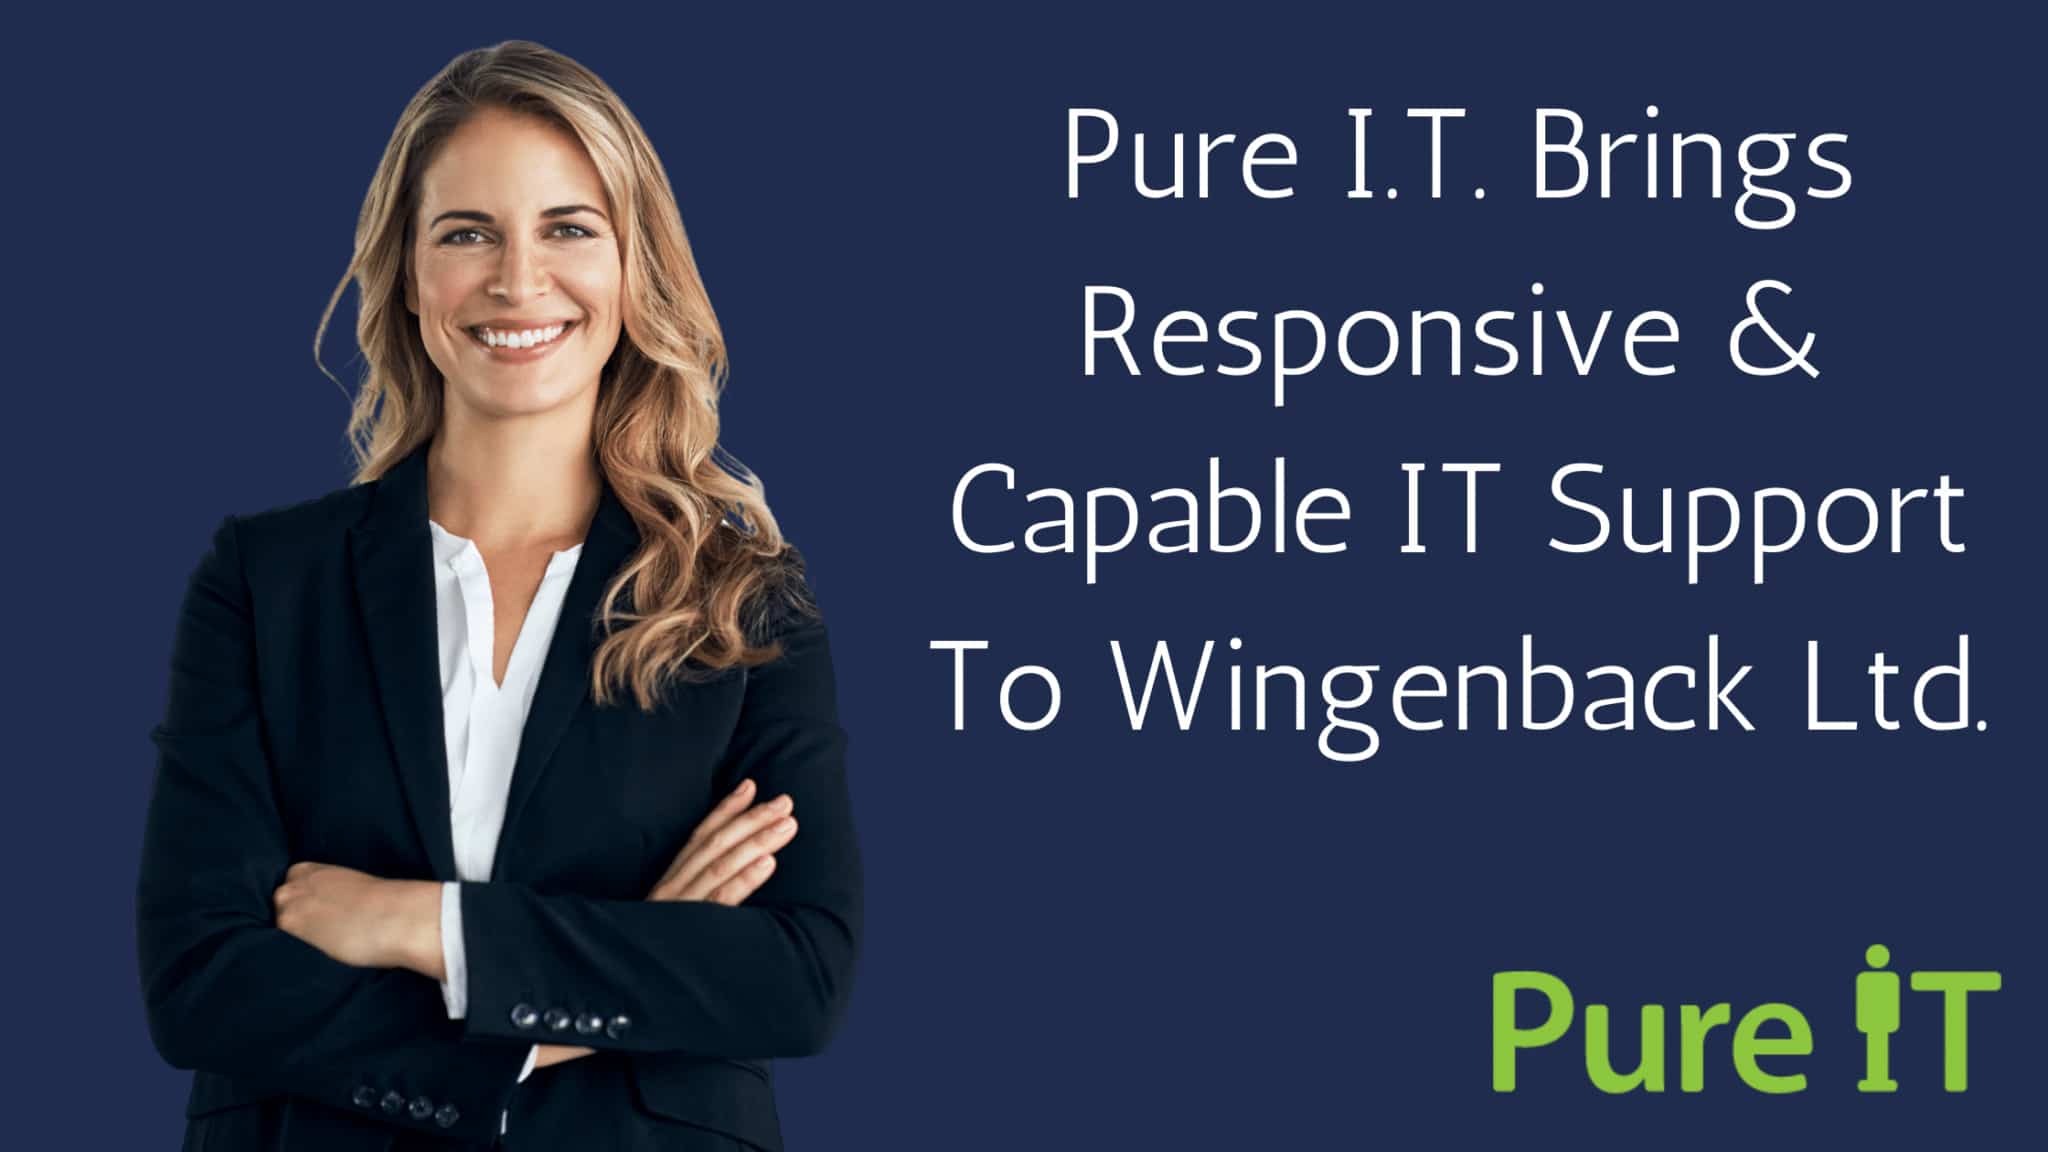 Pure IT Brings Responsive & Capable IT Support To Wingenback Ltd.